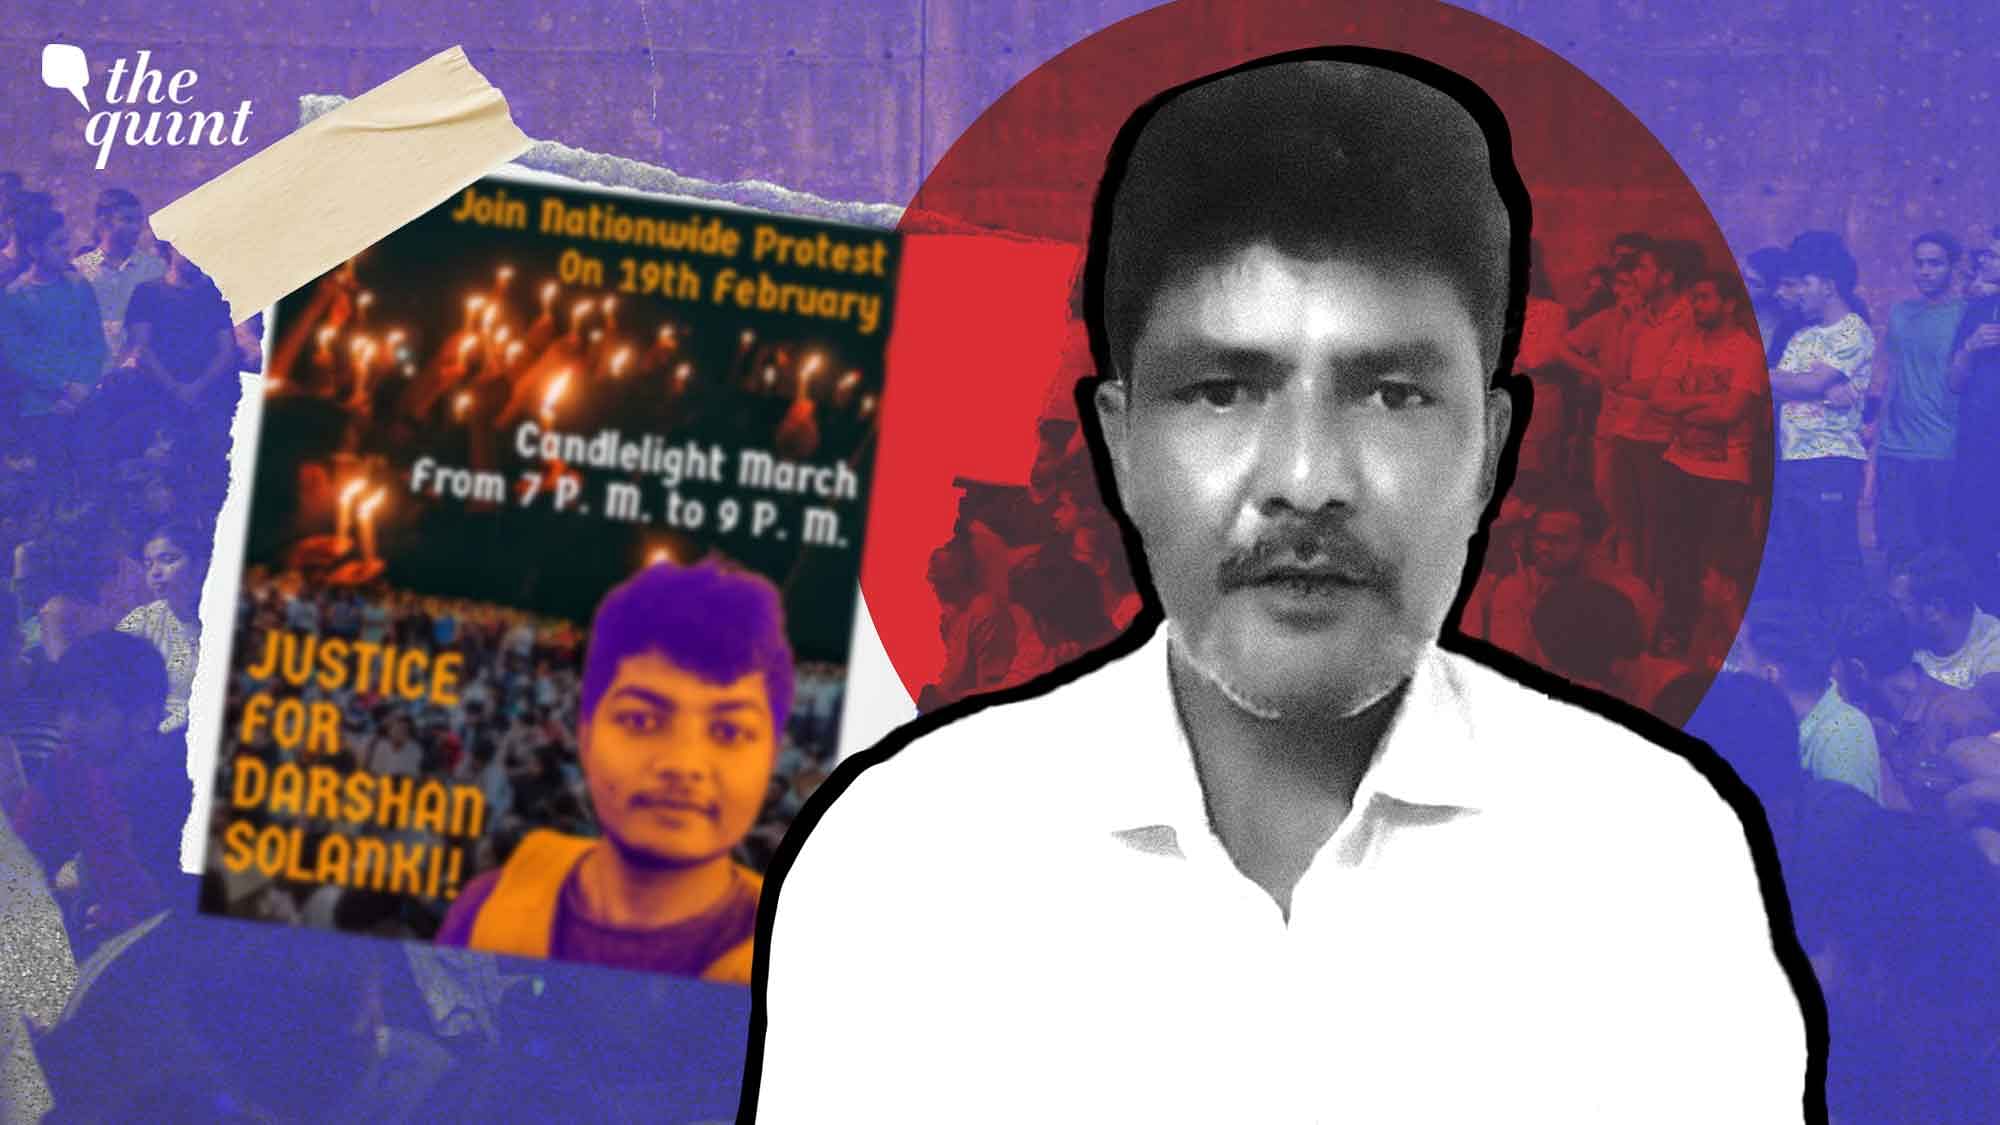 <div class="paragraphs"><p>Ramesh Solanki, father of 18-year-old Darshan who died by suicide at IIT Bombay on 12 February has made a video appeal to participate in a candle-light march to demand justice for his son.</p></div>